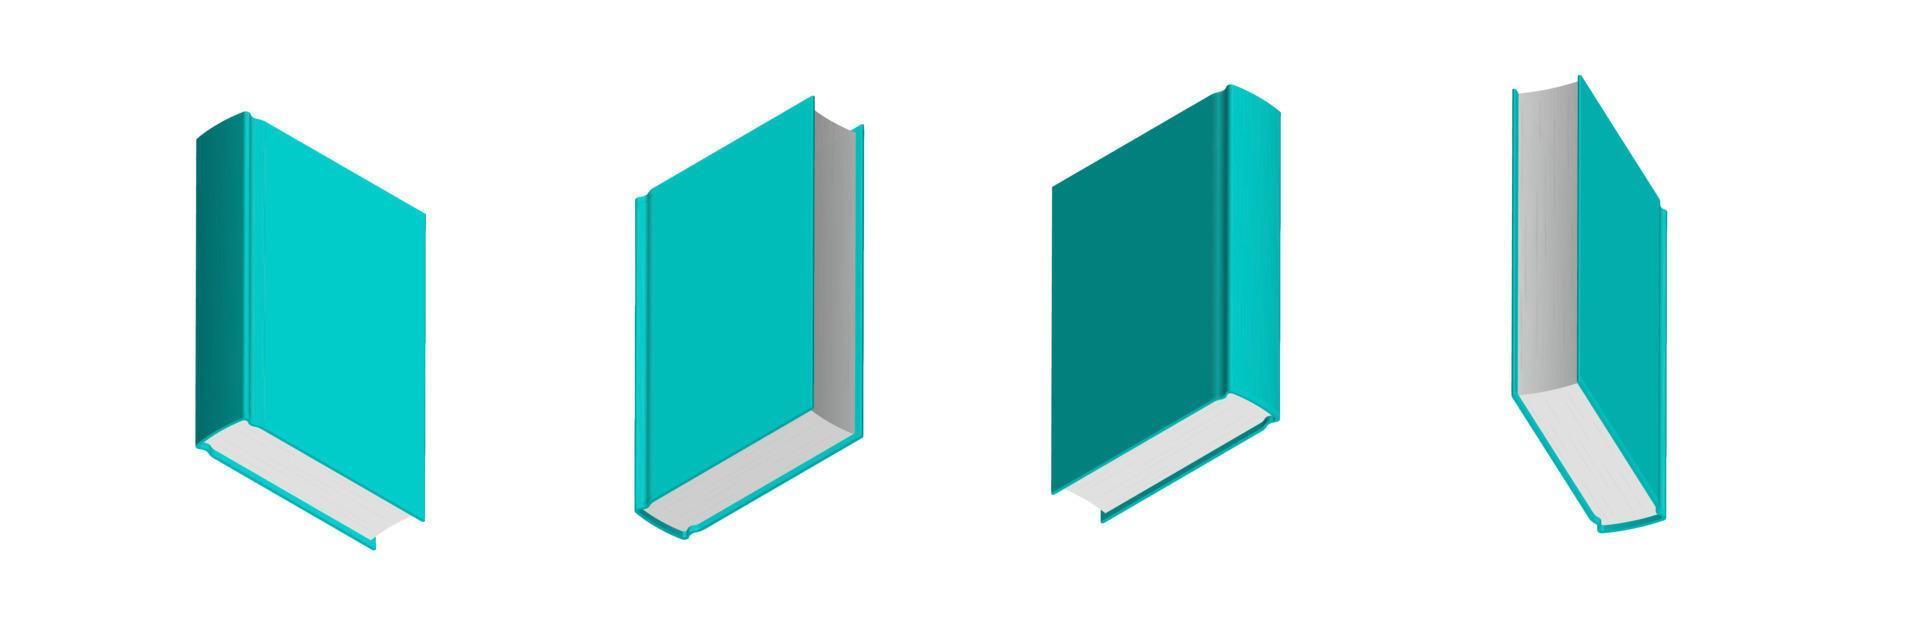 Set of closed green menthol books in different positions for bookstore vector